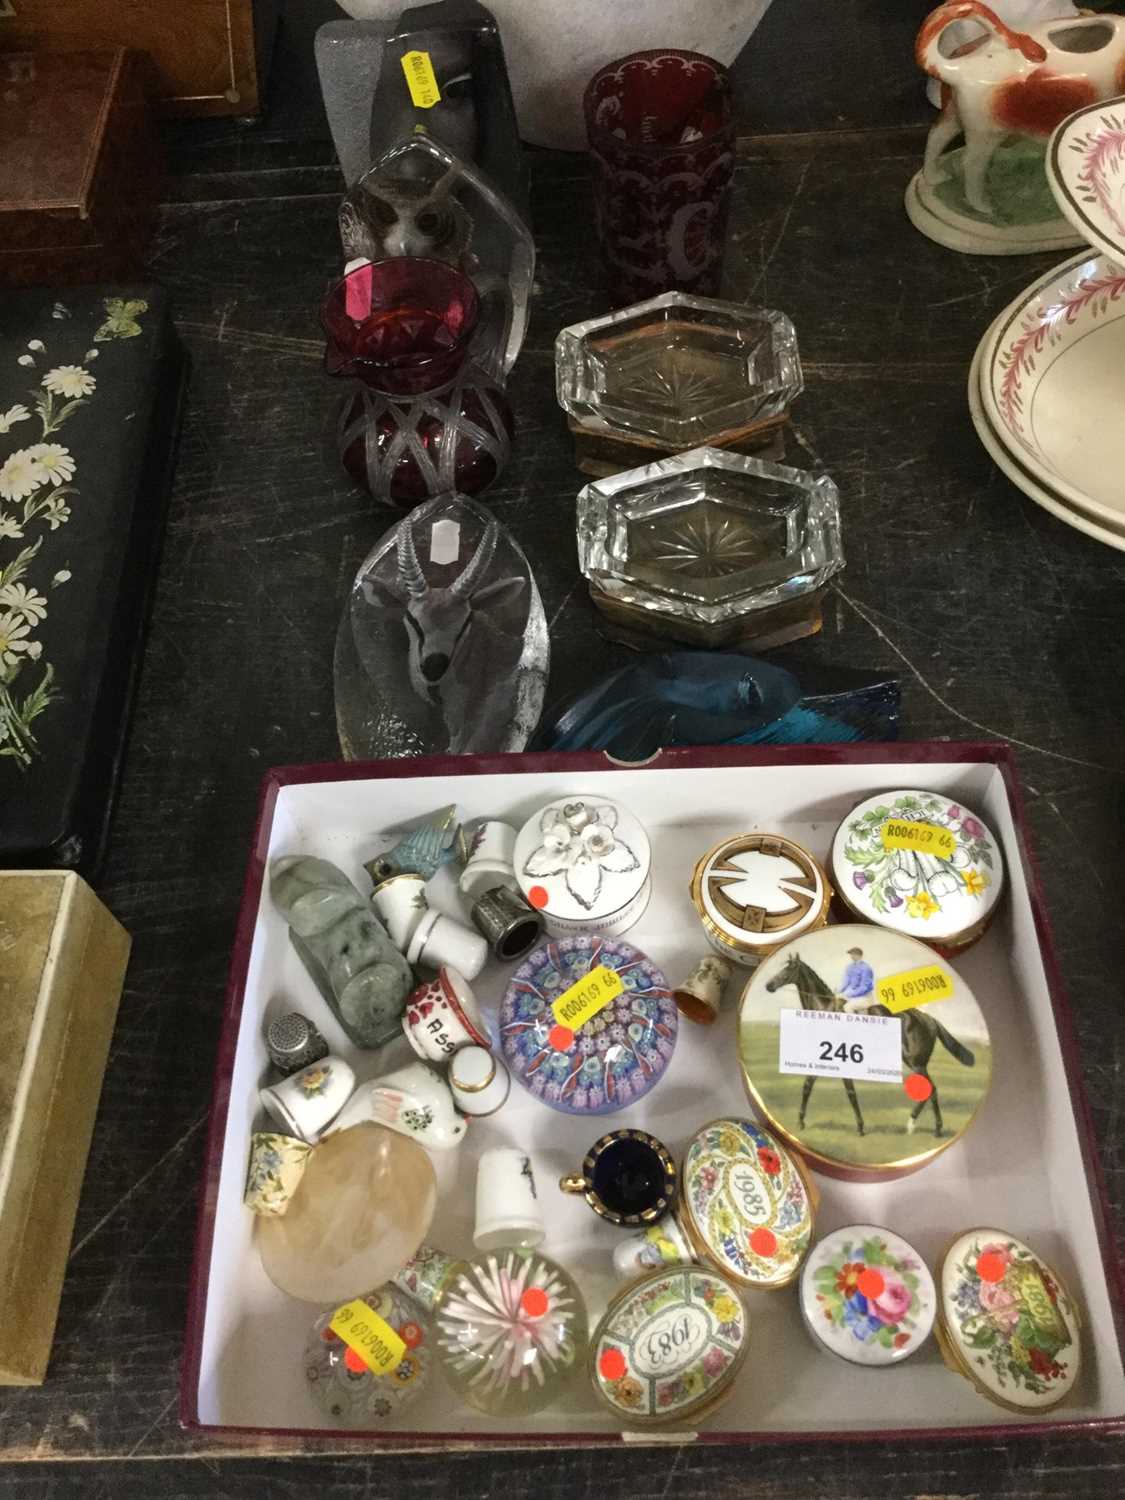 Lot 246 - Small milliefiori glass paperweight and others, boxes